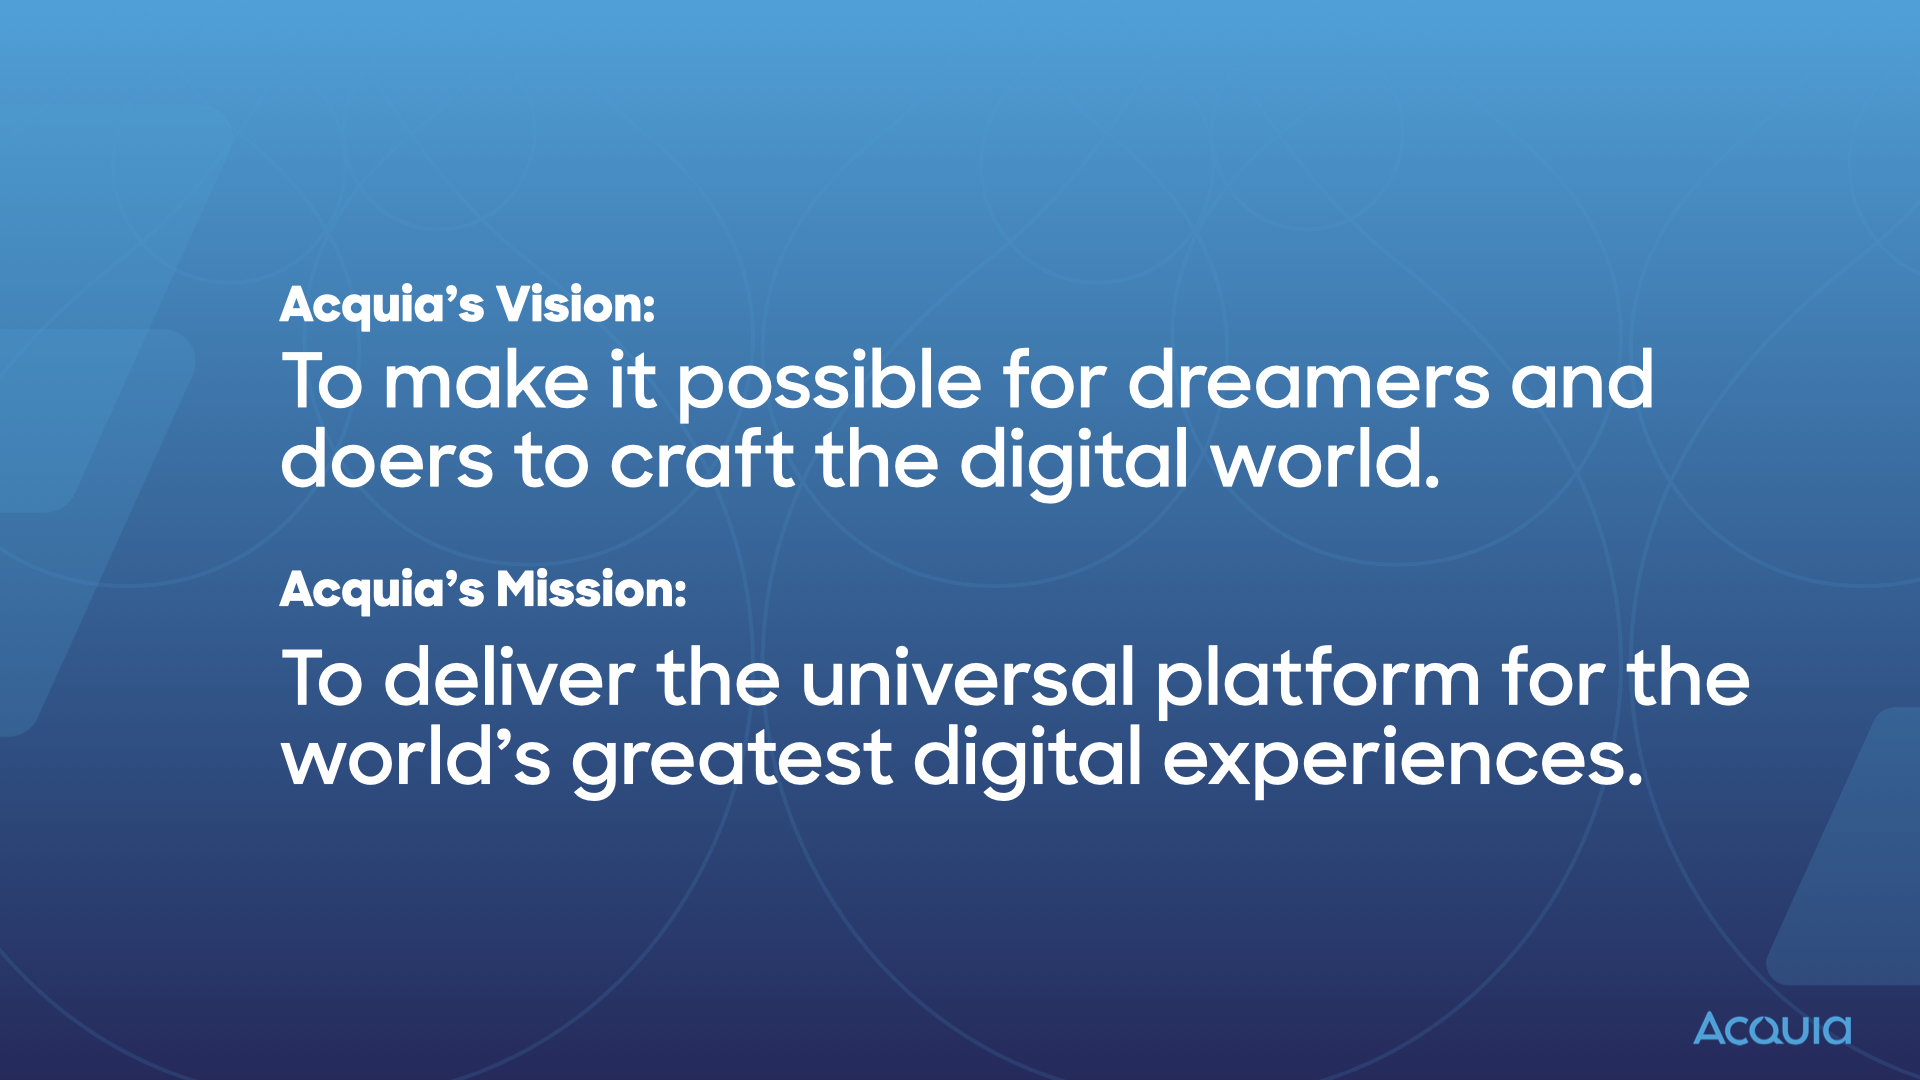 A screenshot of a slide with Acquia's vision and mission statement. Acquia's vision statement reads: "To make it possible for dreamers and doers to craft the digital world." Acquia's mission statement says: "To deliver the universal platform for the world's greatest digital experiences.".